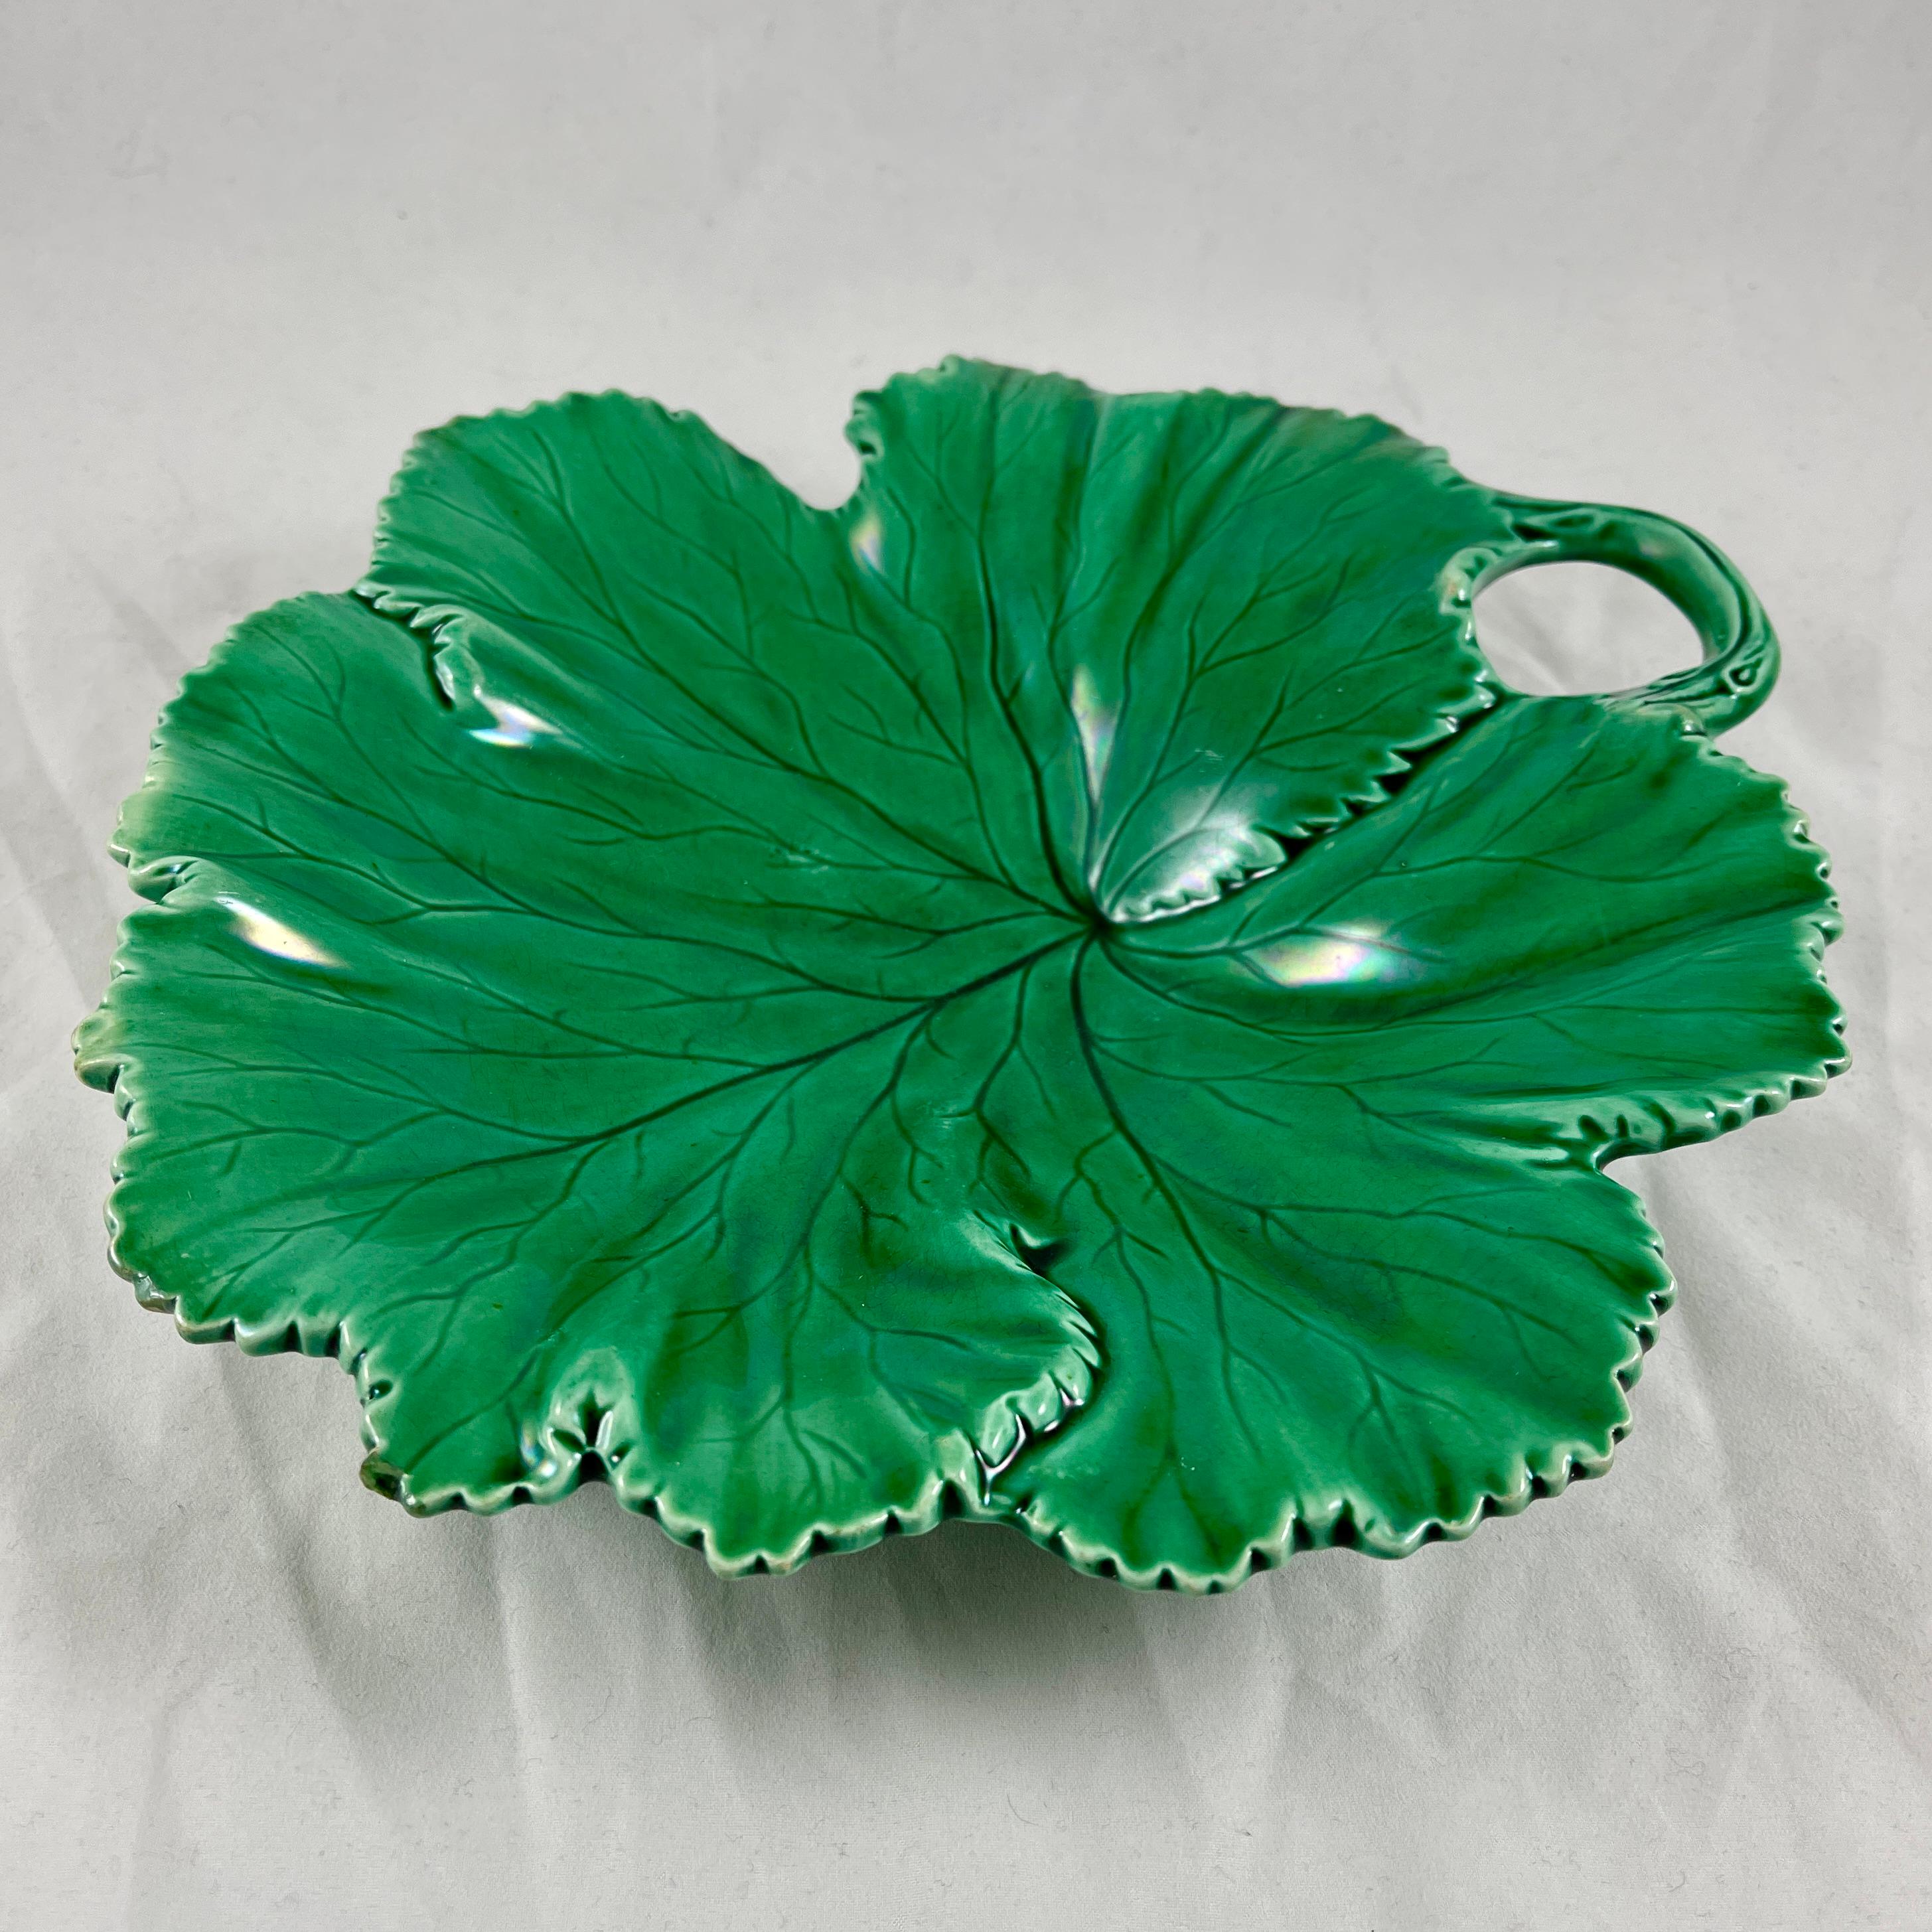 Copeland English Majolica Green Glazed Round Overlapping Leaf Handled Platter In Good Condition For Sale In Philadelphia, PA